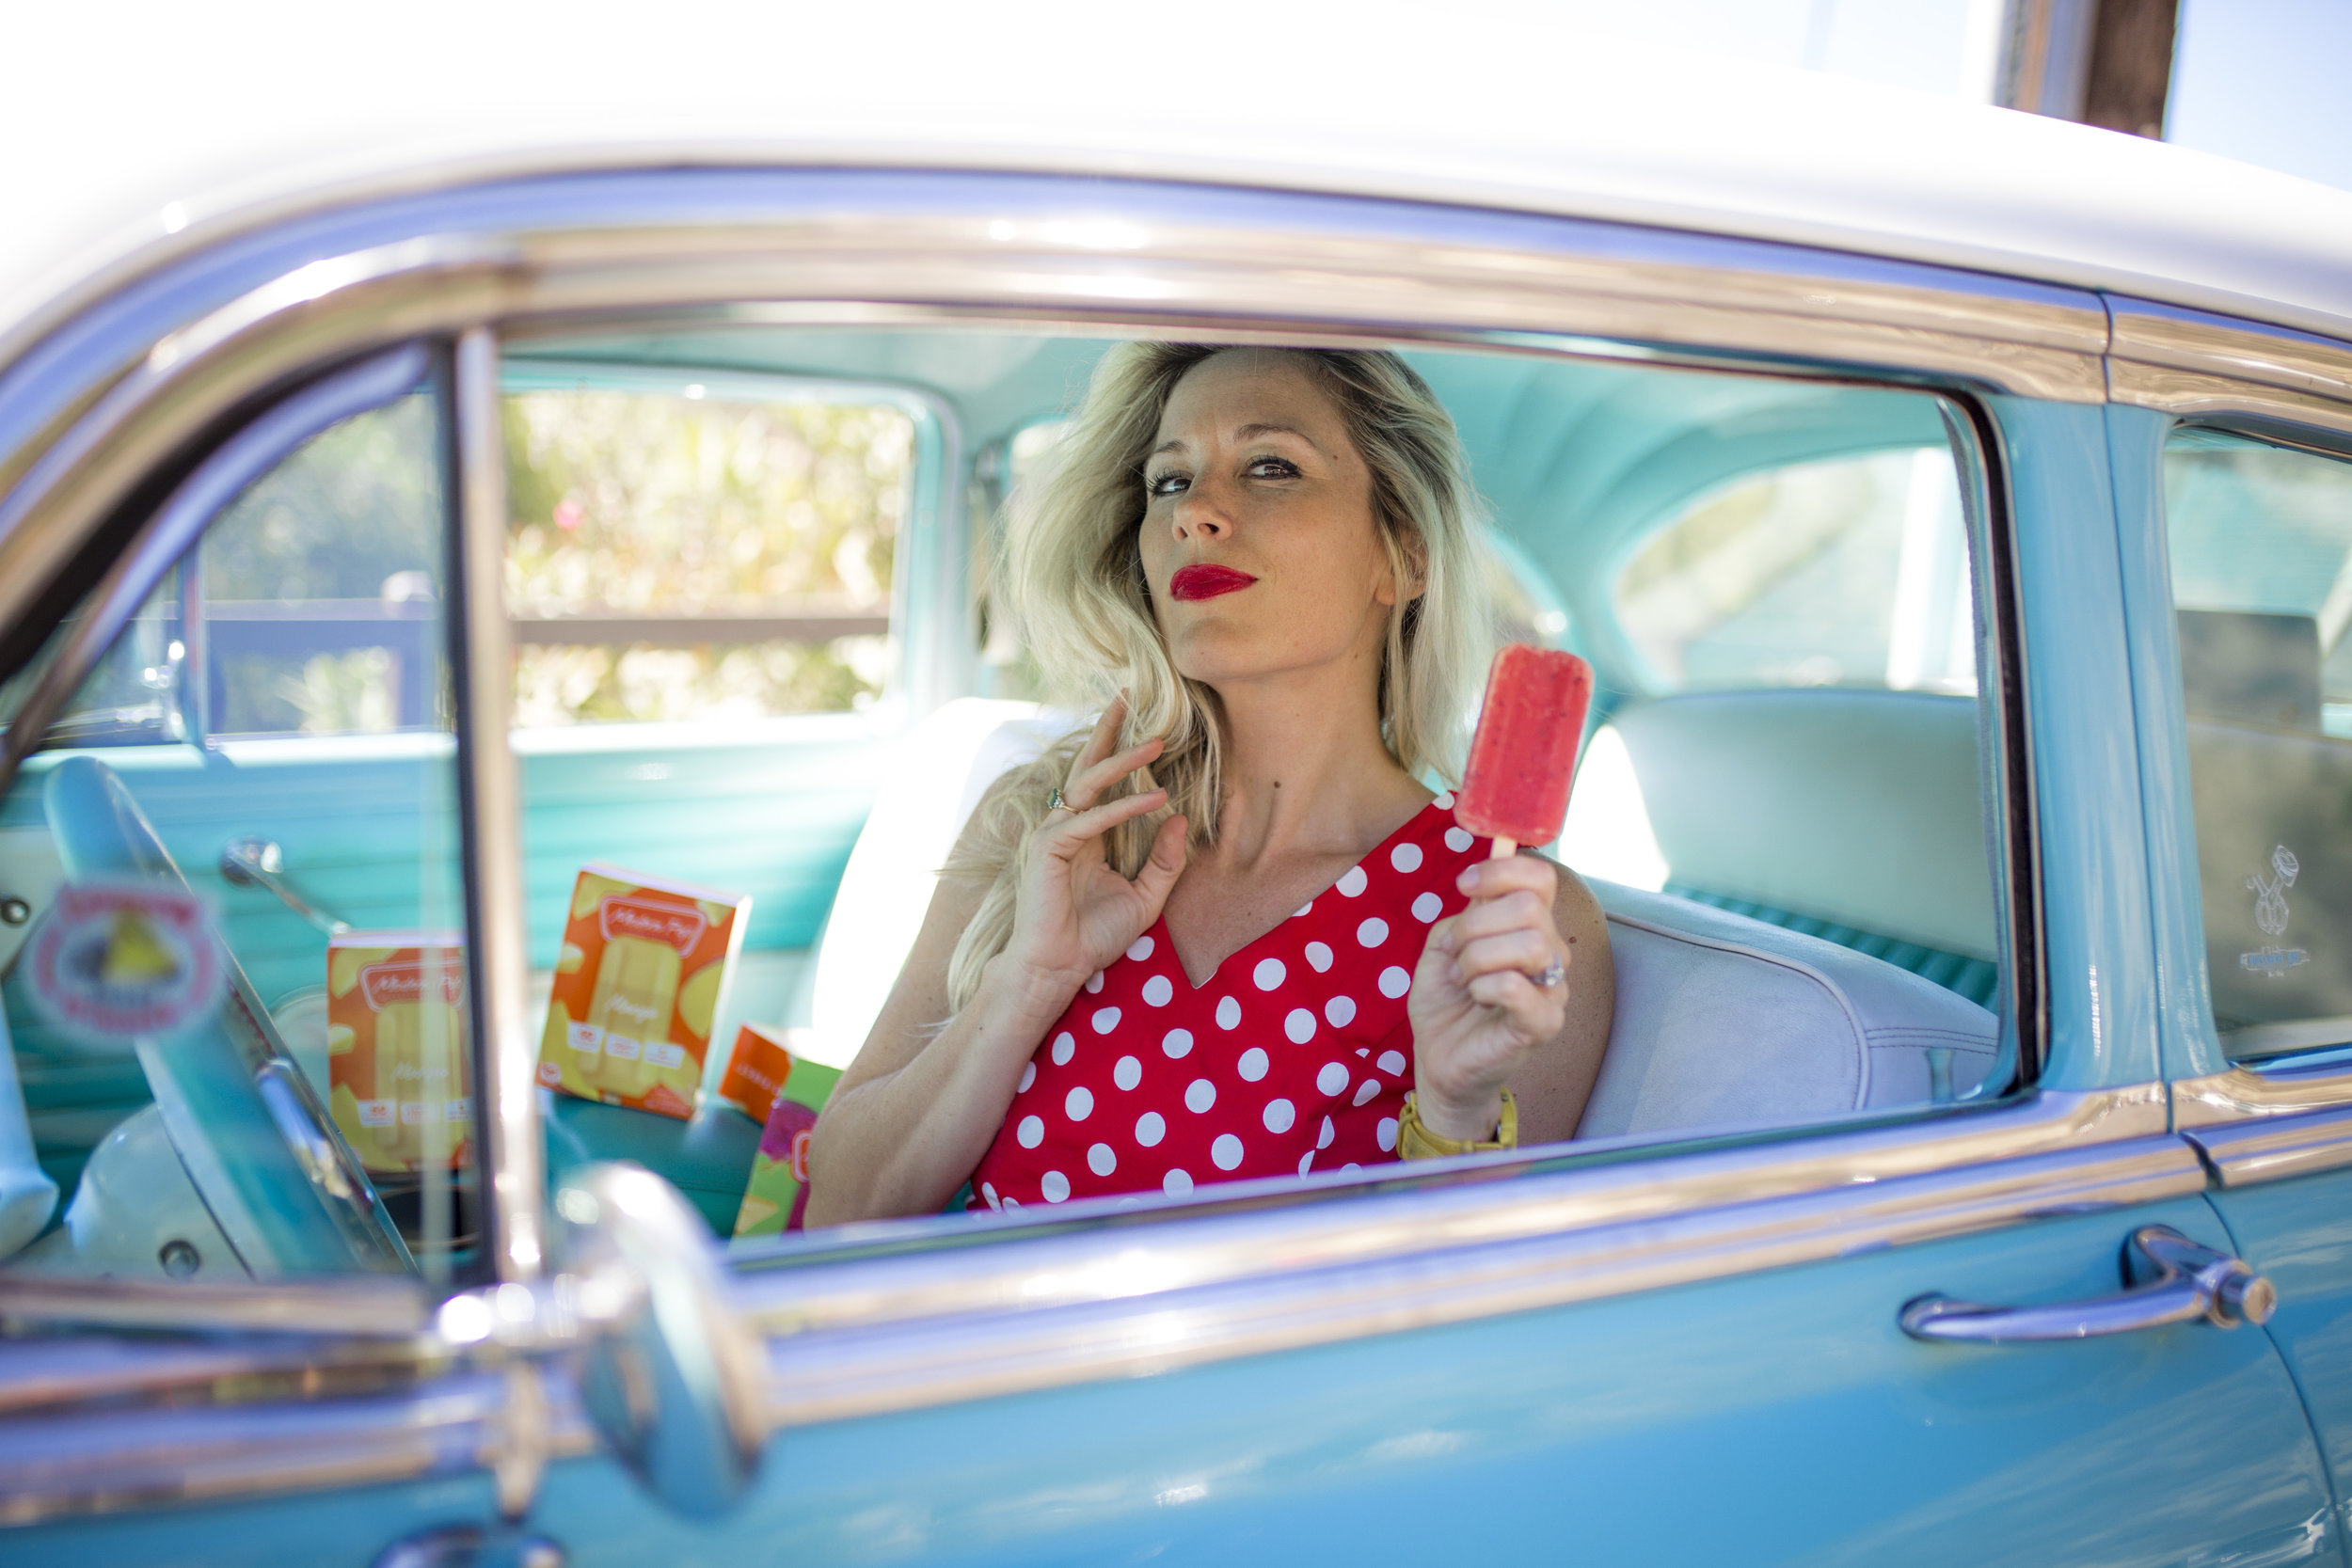 Podolec poses in a 1954 Chevy BelAire Sedan owned by Gil and Bernie Travis, for Mommy In Los Angeles Magazine’s photo shoot in Laguna Beach.